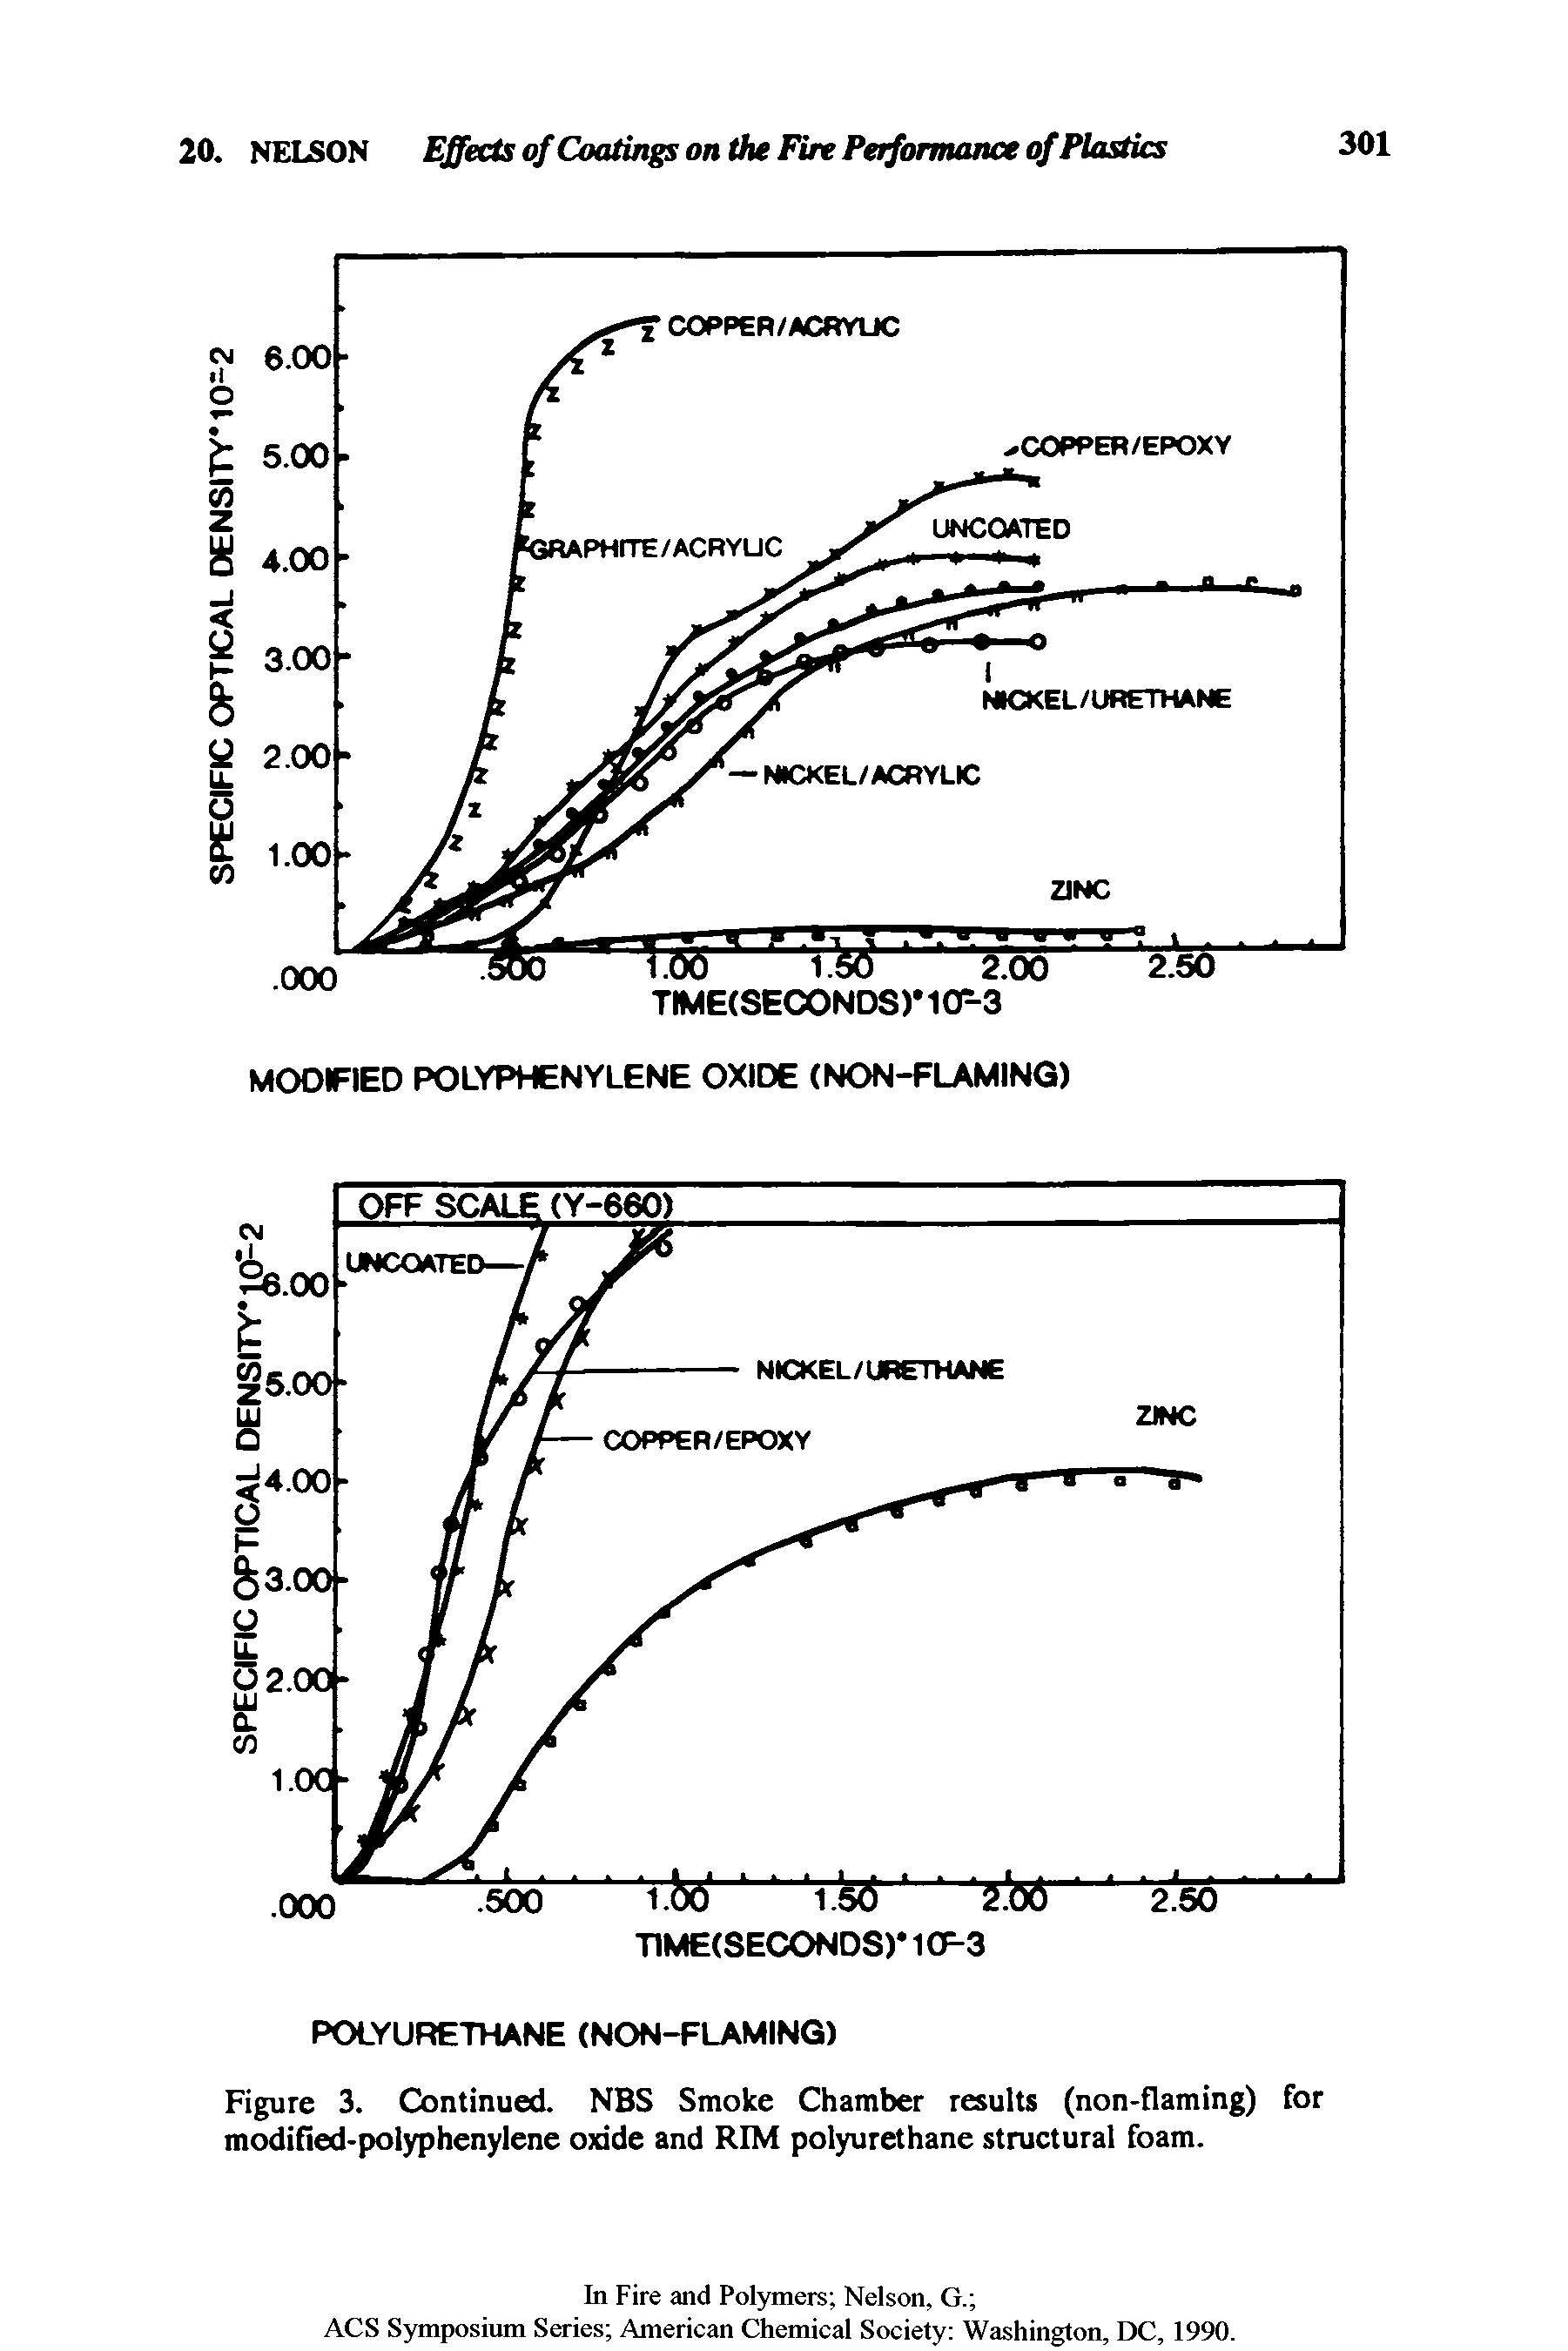 Figure 3. Continued. NBS Smoke Chamber results (non-flaming) for modifled-polyphenylene oxide and RIM polyurethane structural foam.